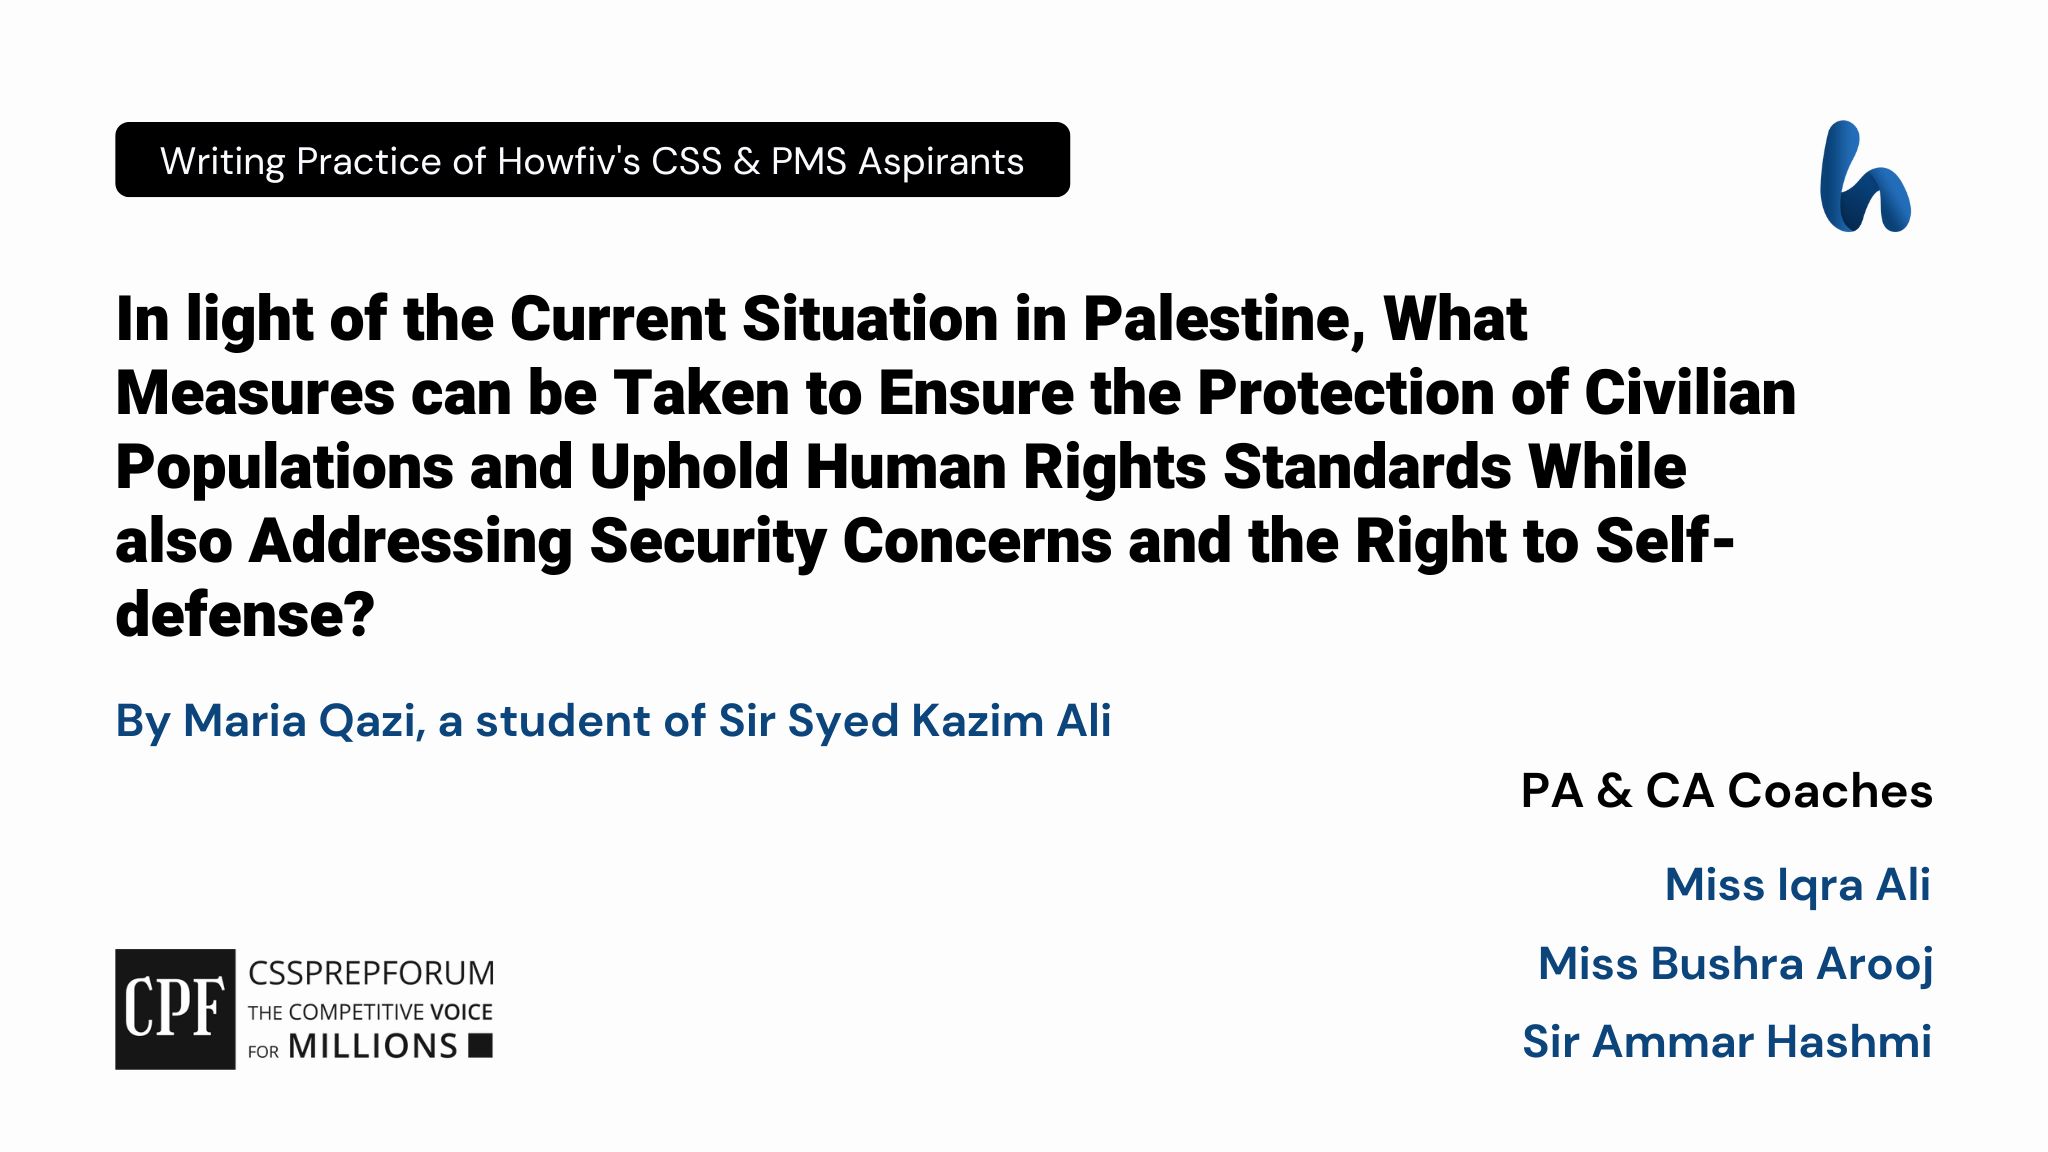 CSS Current Affairs article Measures to Uphold Human Rights Standards in Palestine is written by Maria Qazi under the supervision of Sir Ammar Hashmi...